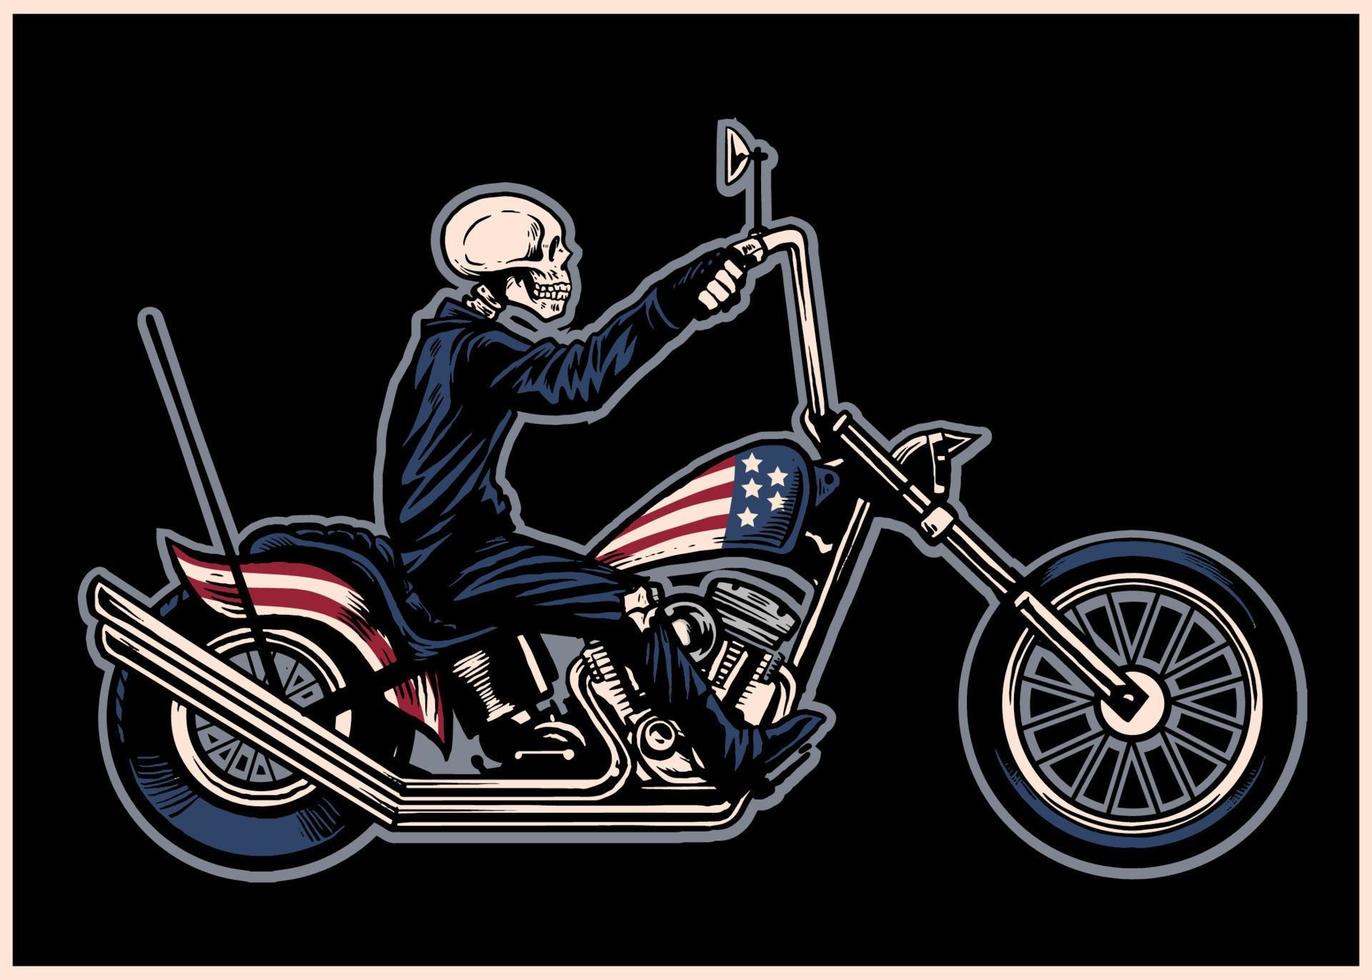 Hand drawing skull riding a chopper motorcycle vector